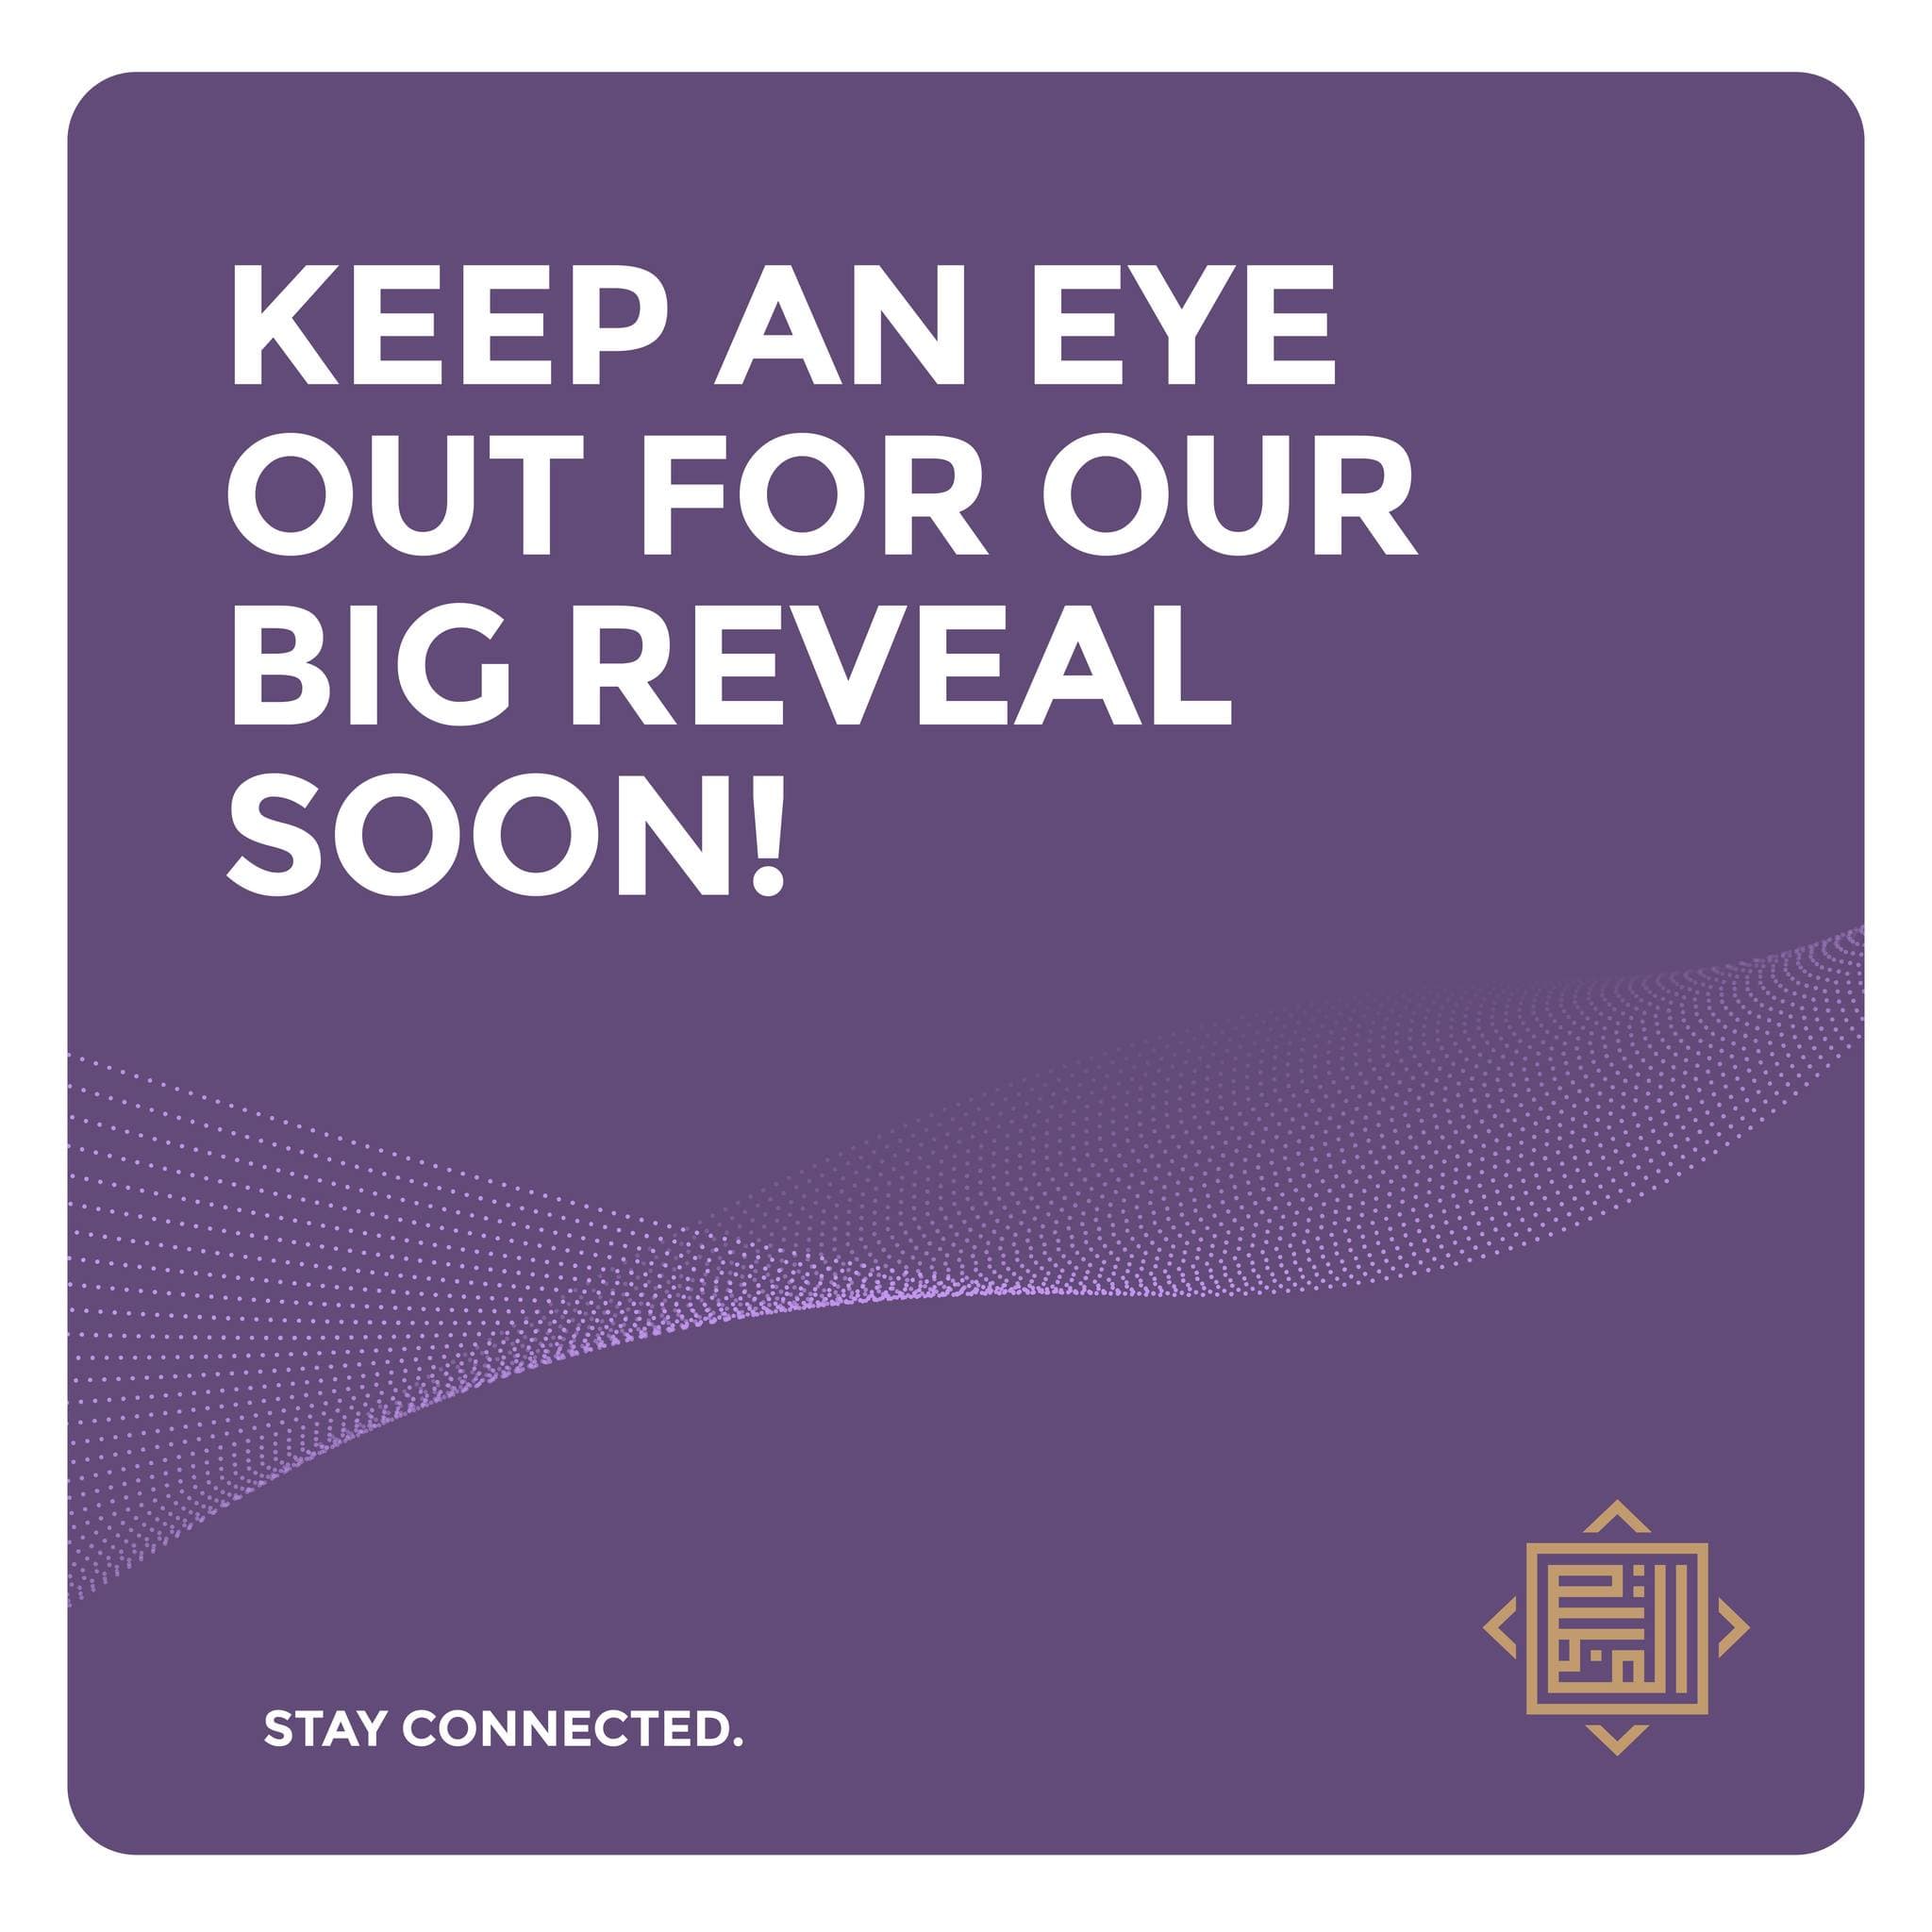 Stay tuned this week for an exciting reveal!<br /><br />#almadallah #mymadallah